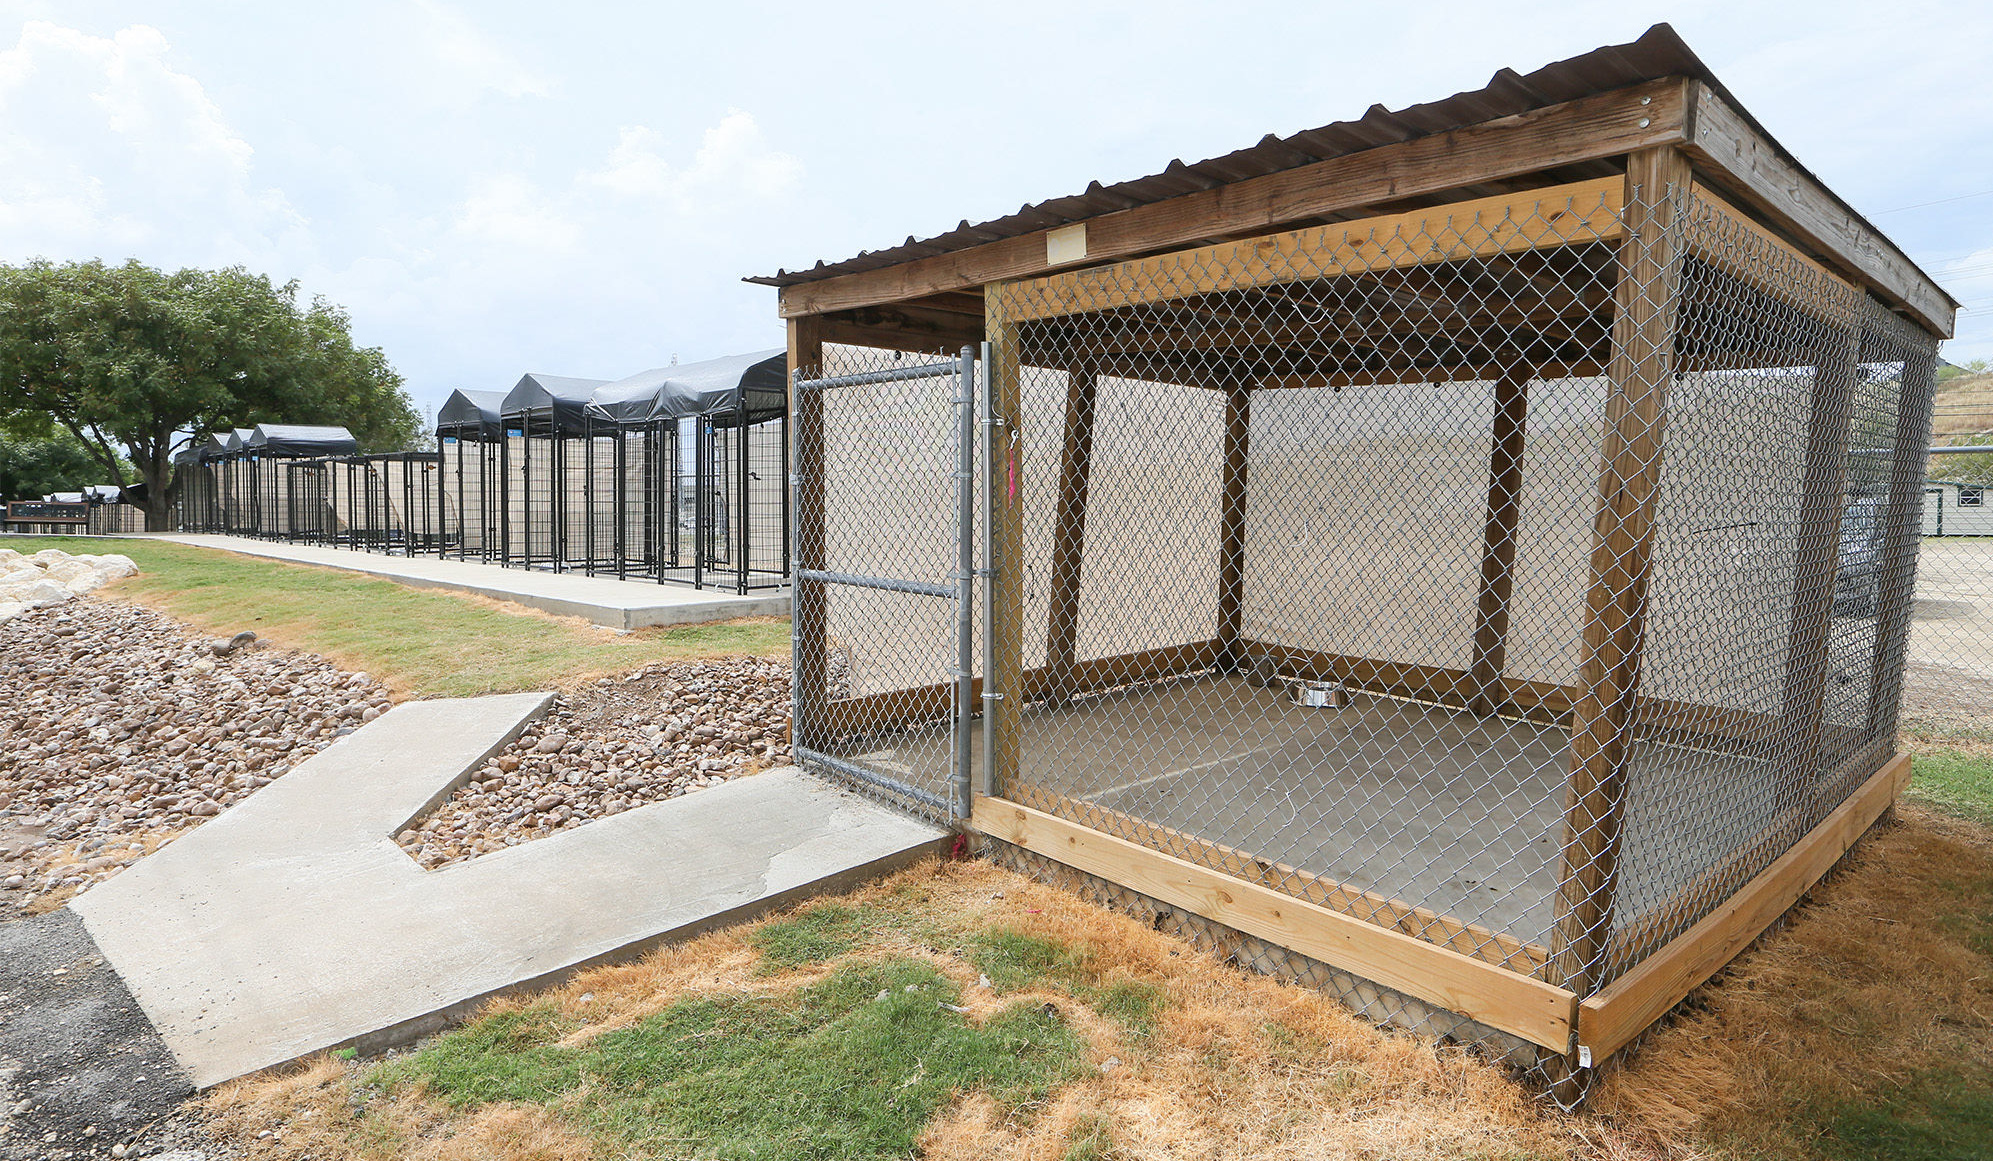 Addition to hospital helps mission of Animal Defense League of Texas